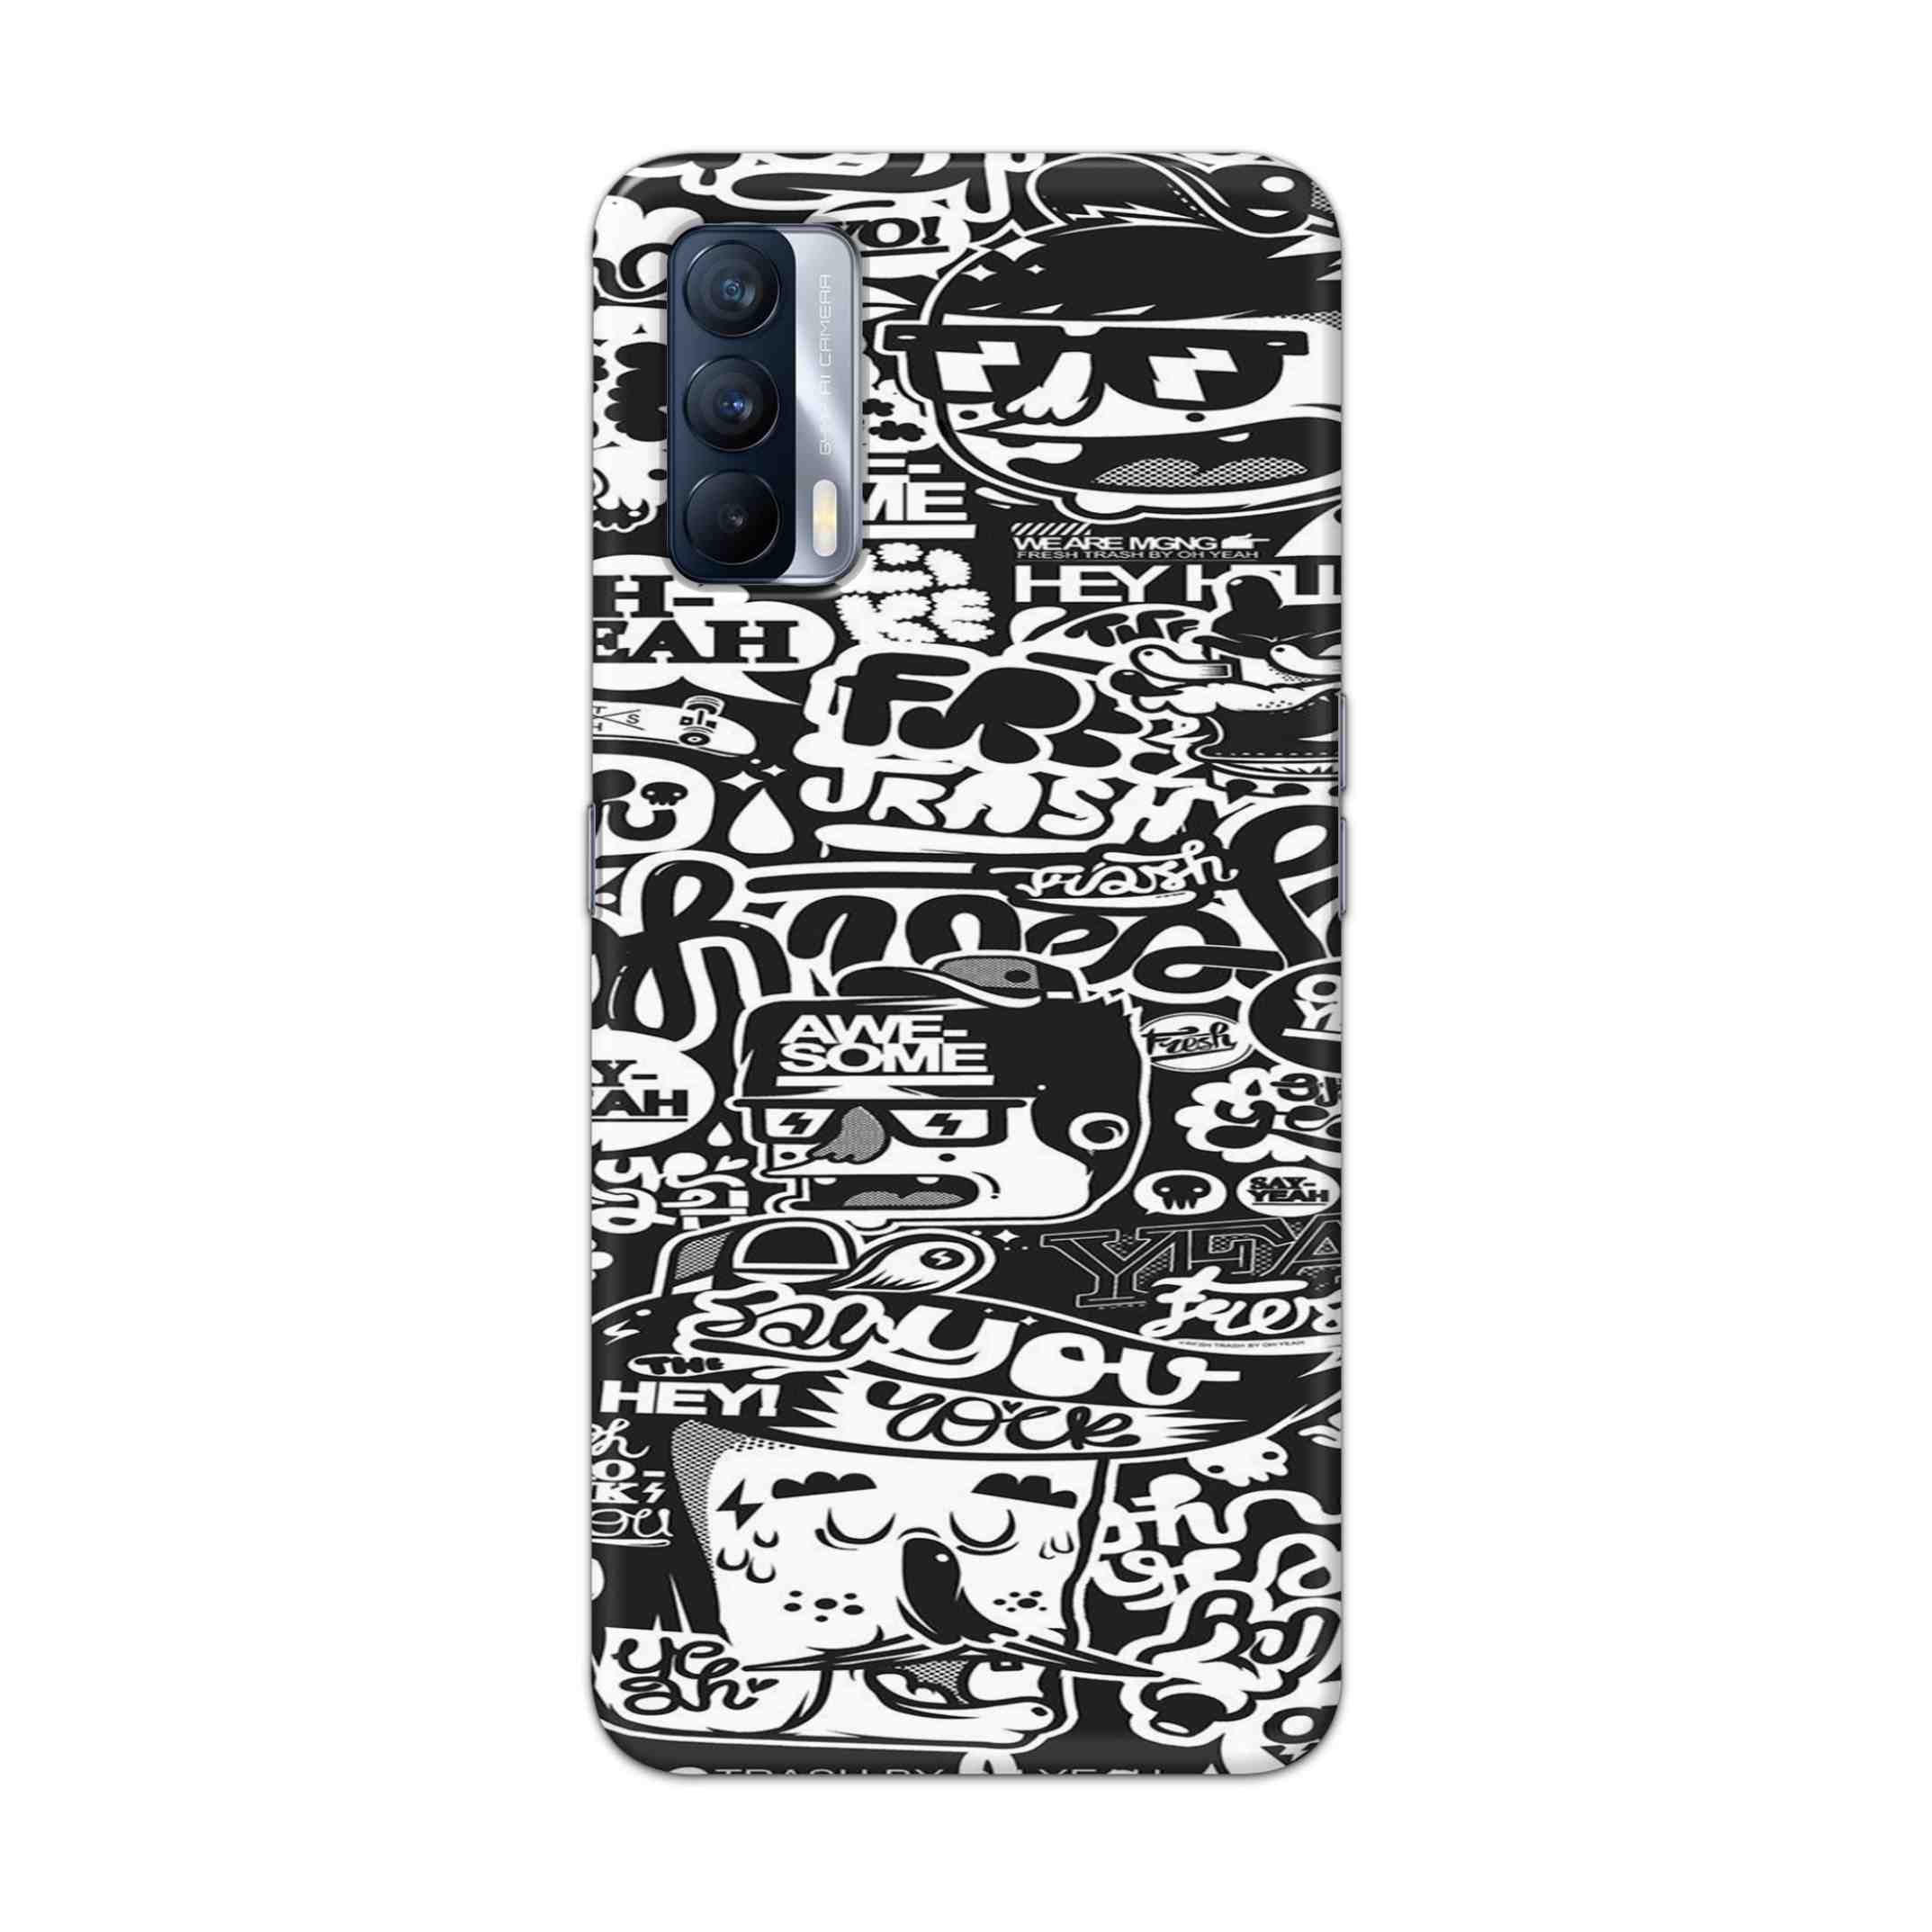 Buy Awesome Hard Back Mobile Phone Case Cover For Realme X7 Online